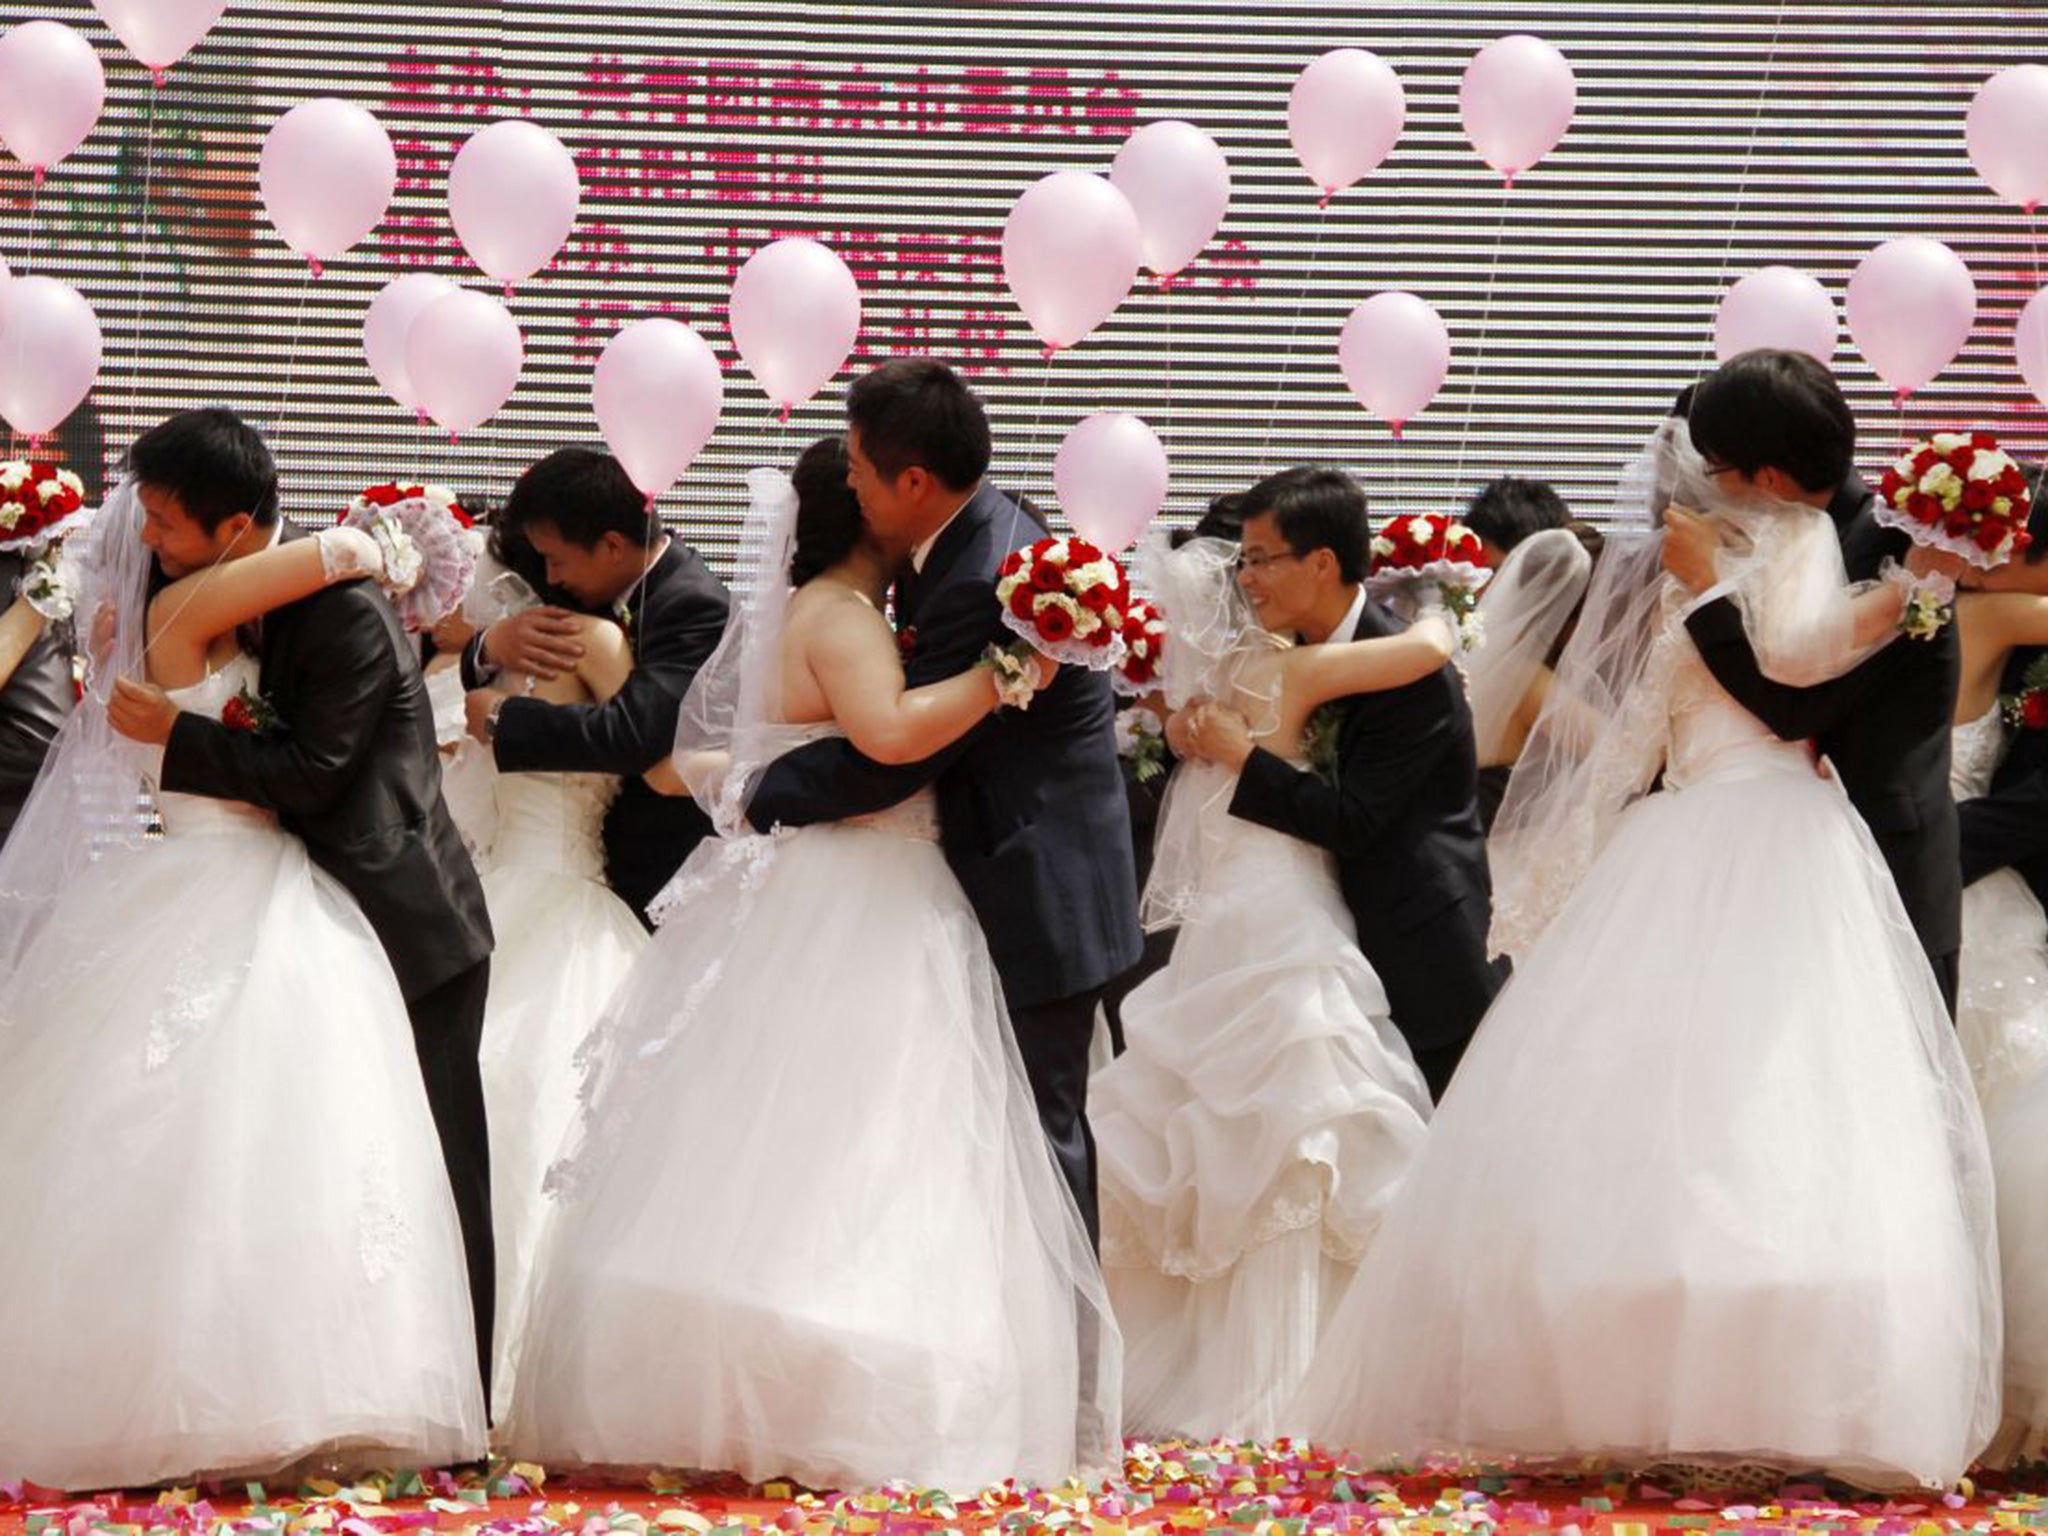 Single women in China in their late twenties and early thirties are deemed to be 'leftover women' or shengnu due to engrained traditional beliefs that women who are not married by then are undesirable